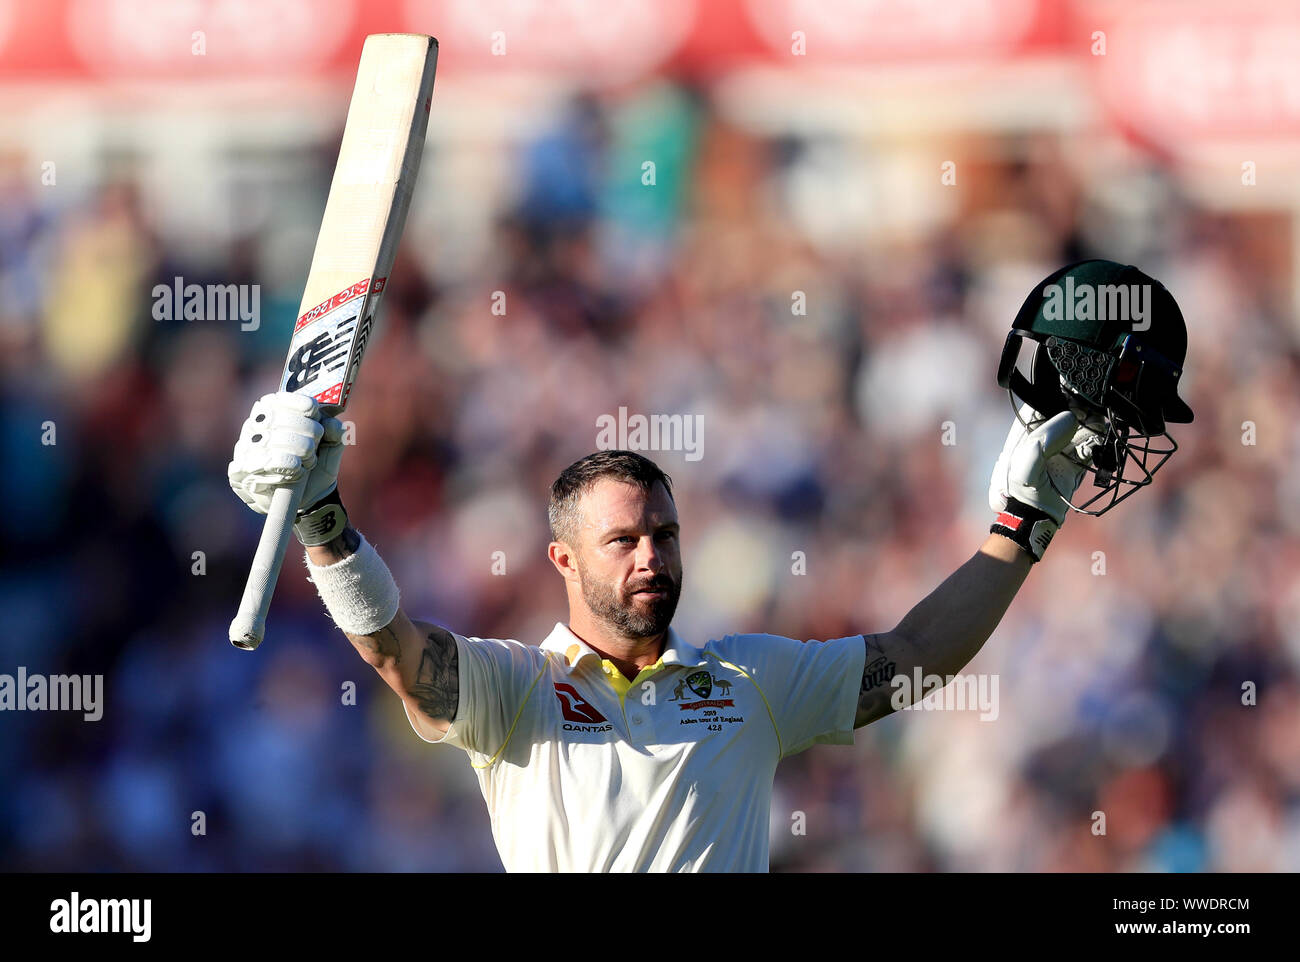 Australia's Matthew Wade during day four of the fifth test match at The Kia Oval, London. Stock Photo